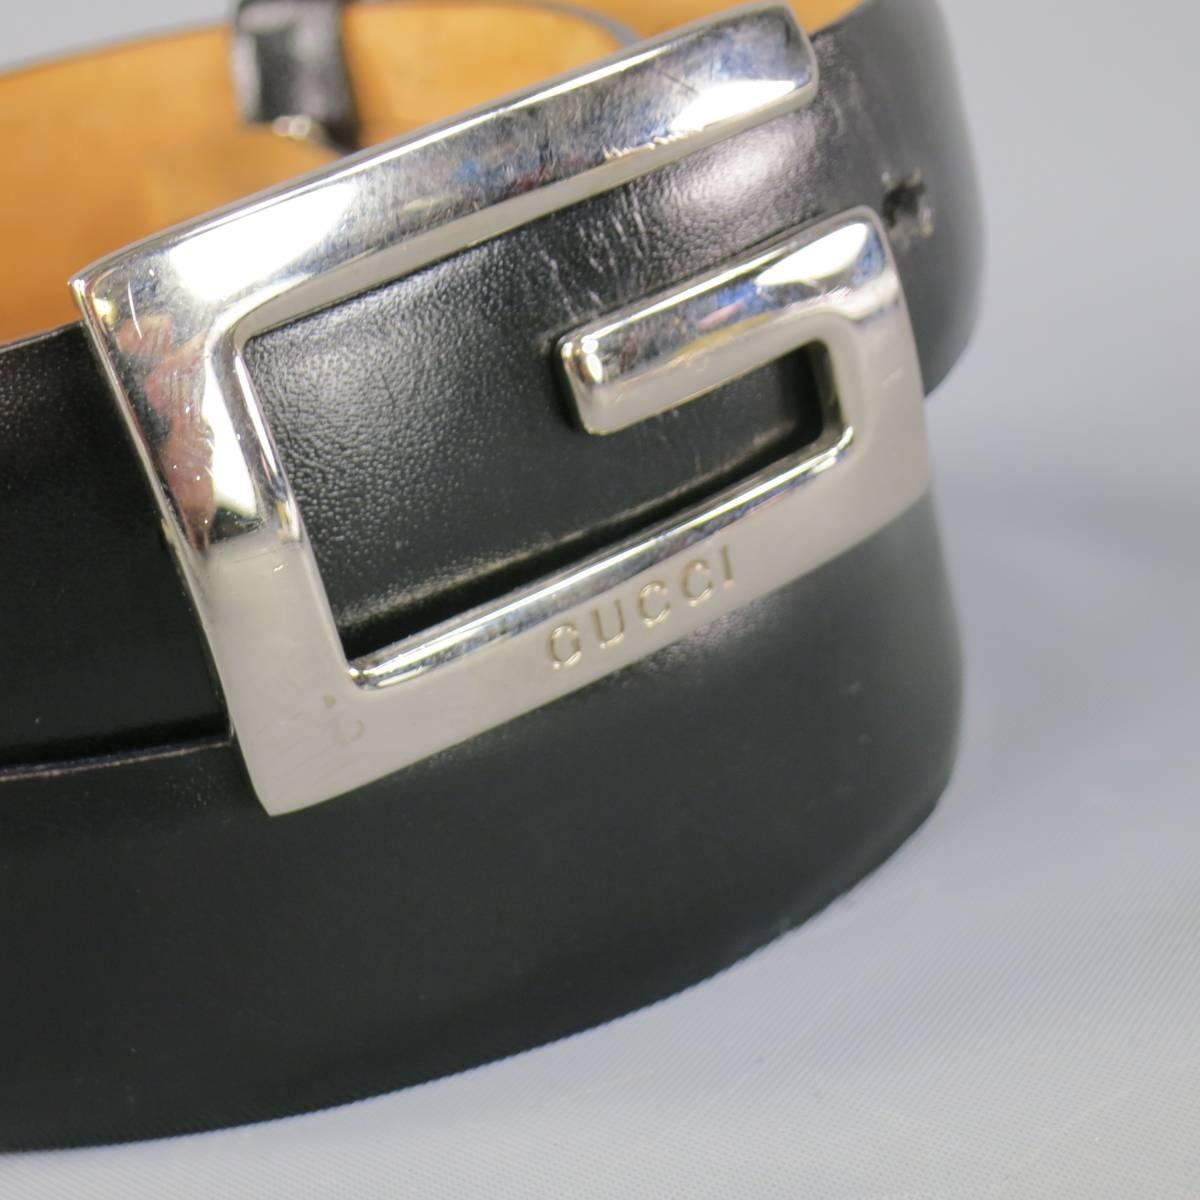 Classic GUCCI skinny belt with a smooth black leather strap and silver tone metal engraved G buckle. Minor wear. Made in Italy.
 
Good Pre-Owned Condition.
Marked: 70.28 036.1046.1004
 
Length: 34 in.
Width: 1 in.
Fits: 26.5-28.5 in.